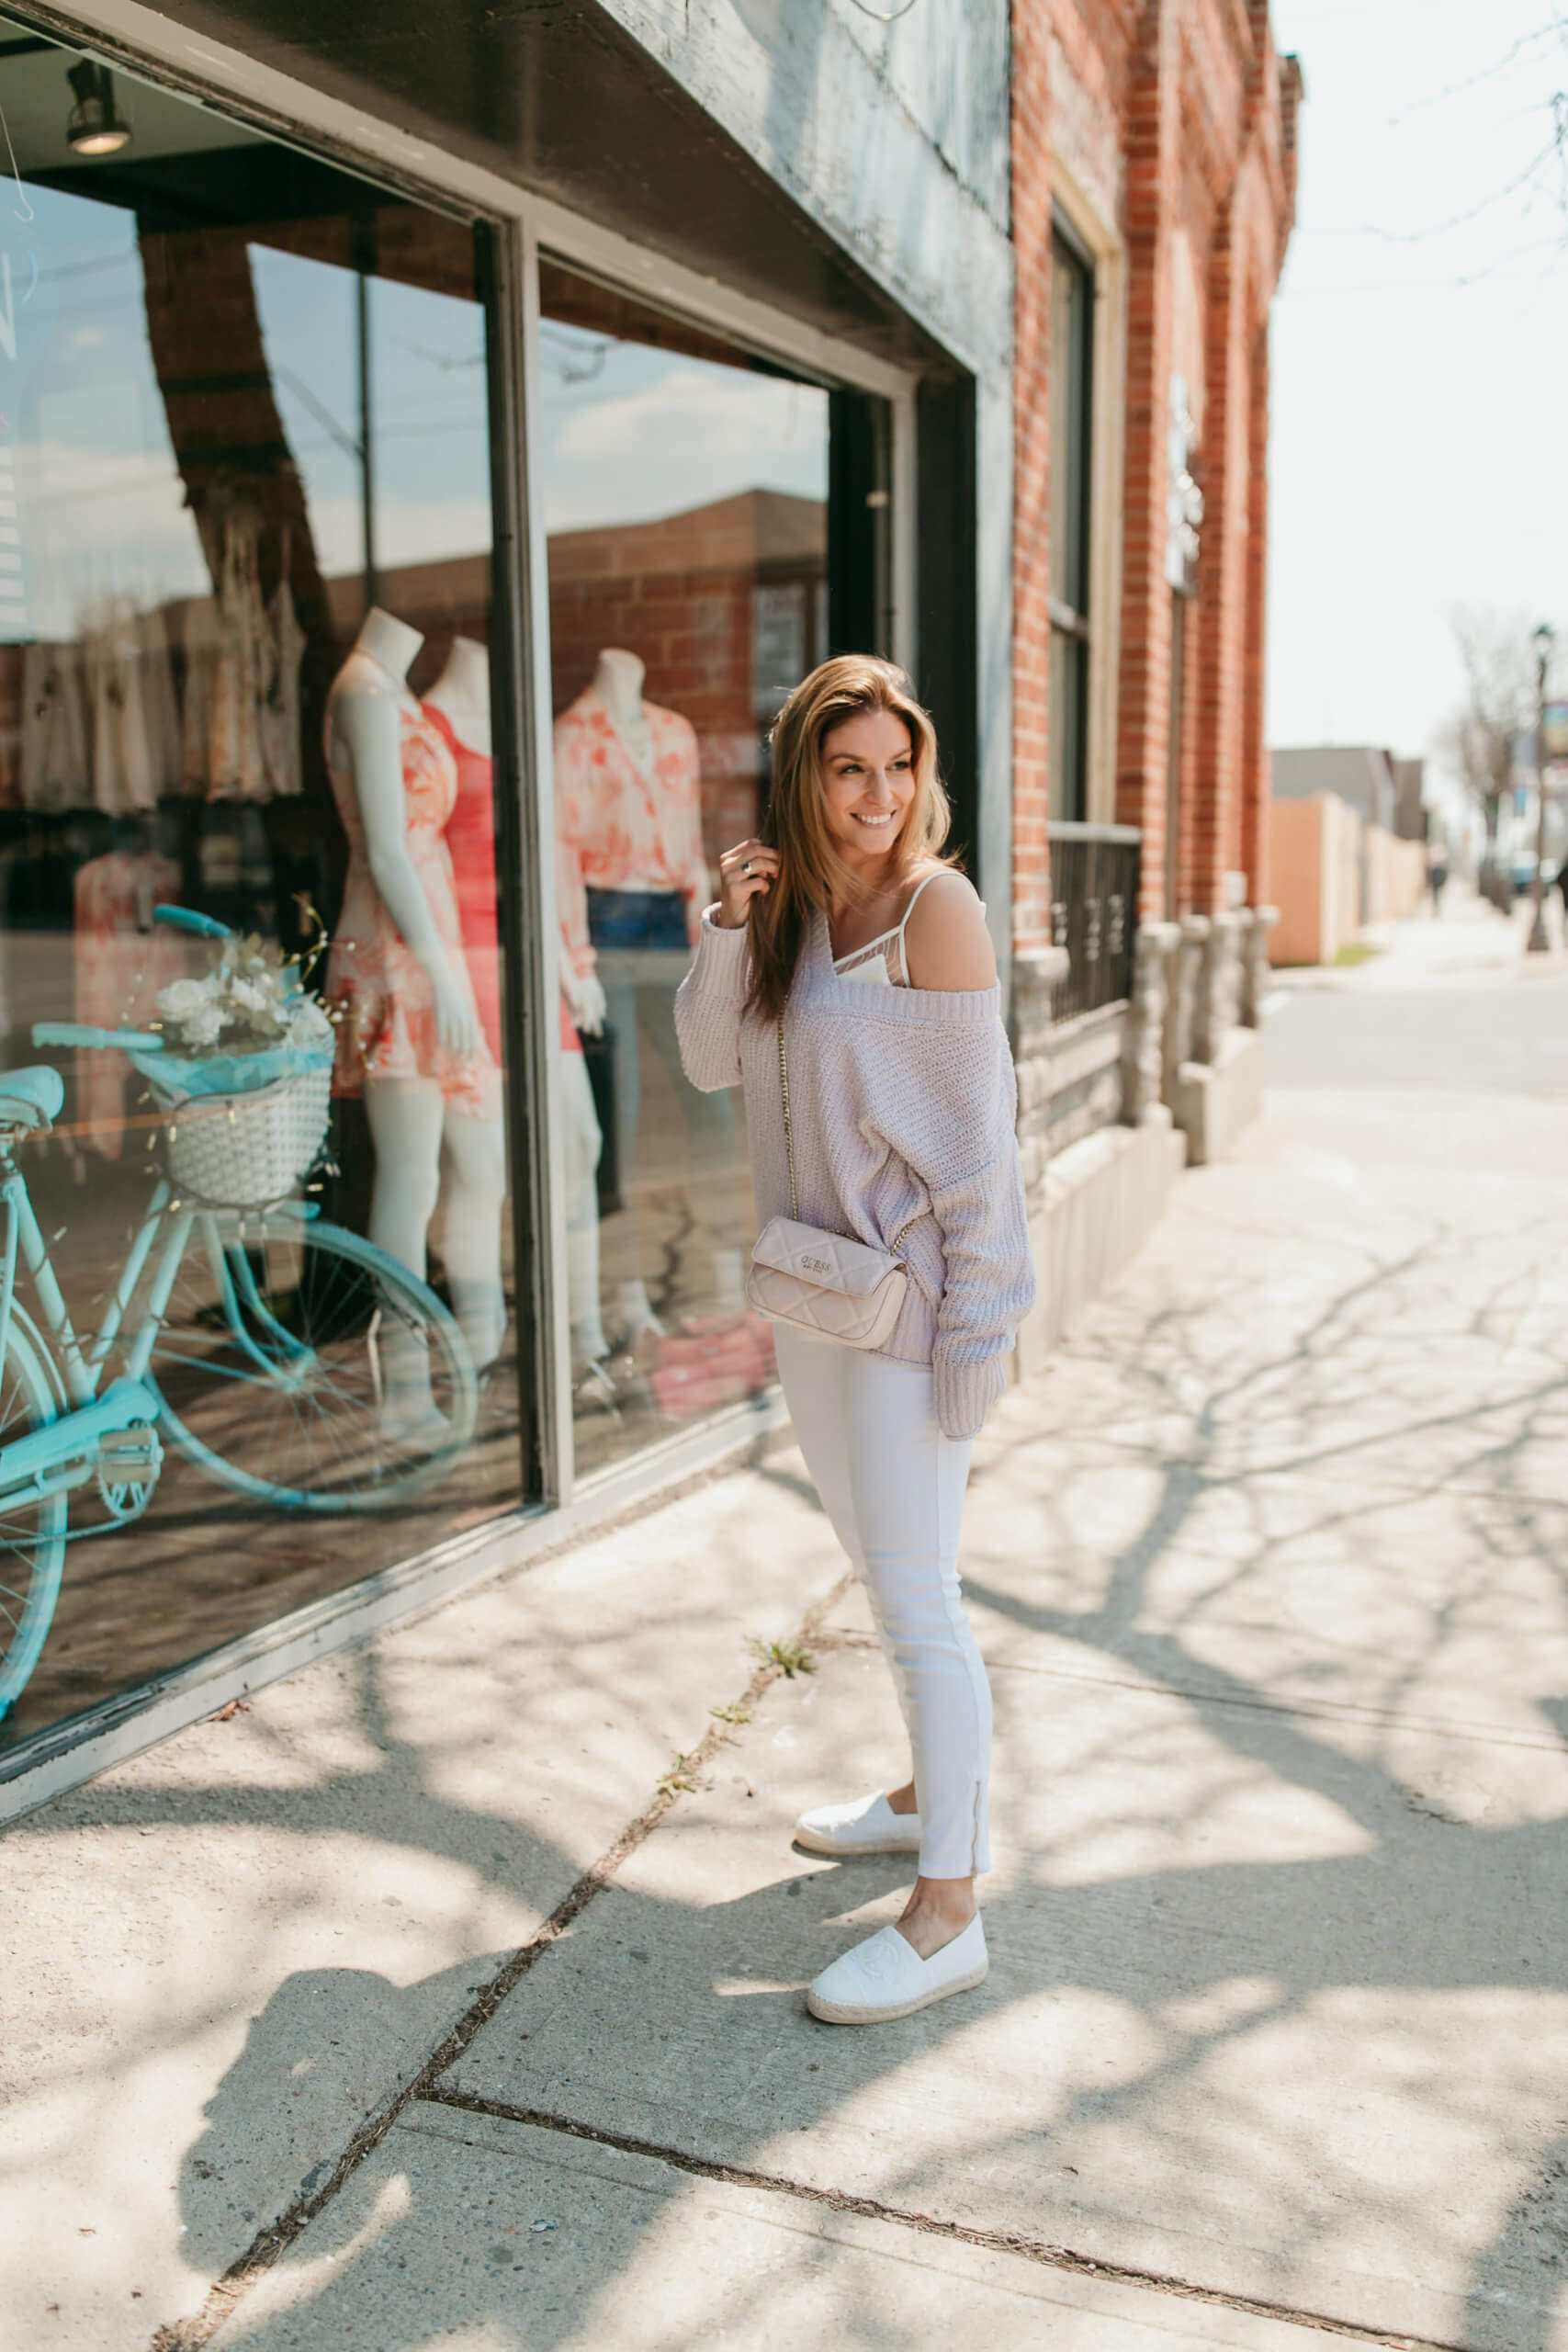 Spring with Turquoise Boutique; shop durham region ; whitby shopping